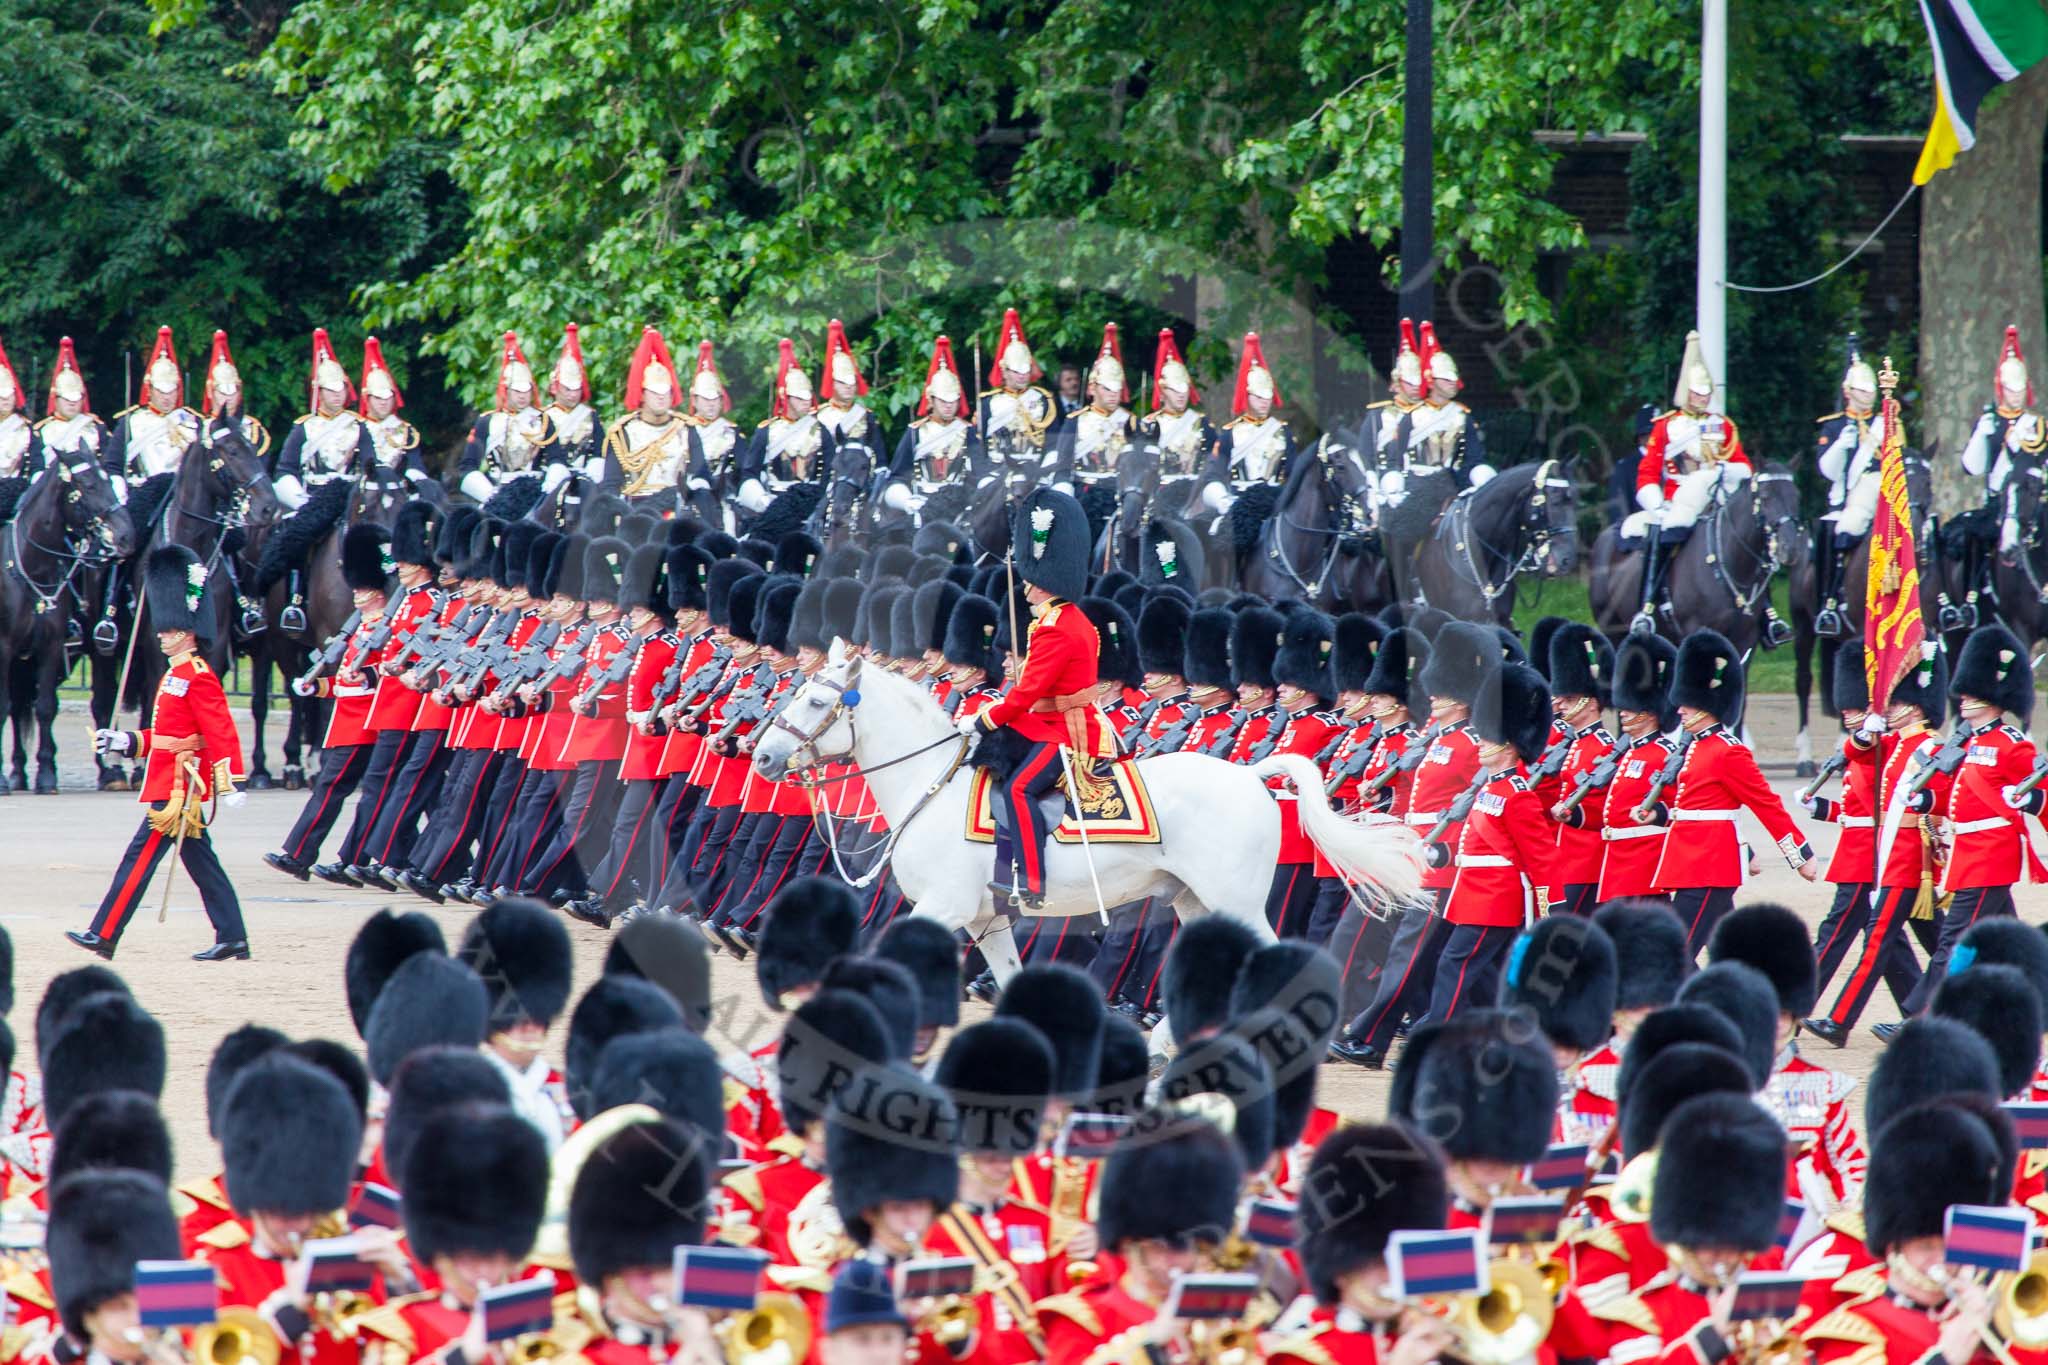 Trooping the Colour 2013: No. 1 Guard (Escort for the Colour),1st Battalion Welsh Guards, at the beginning of the March Past in Quick Time. Behind them the Mounted Bands of the Household Cavalry. The Field Officer returns to the head of the march past. Image #581, 15 June 2013 11:42 Horse Guards Parade, London, UK